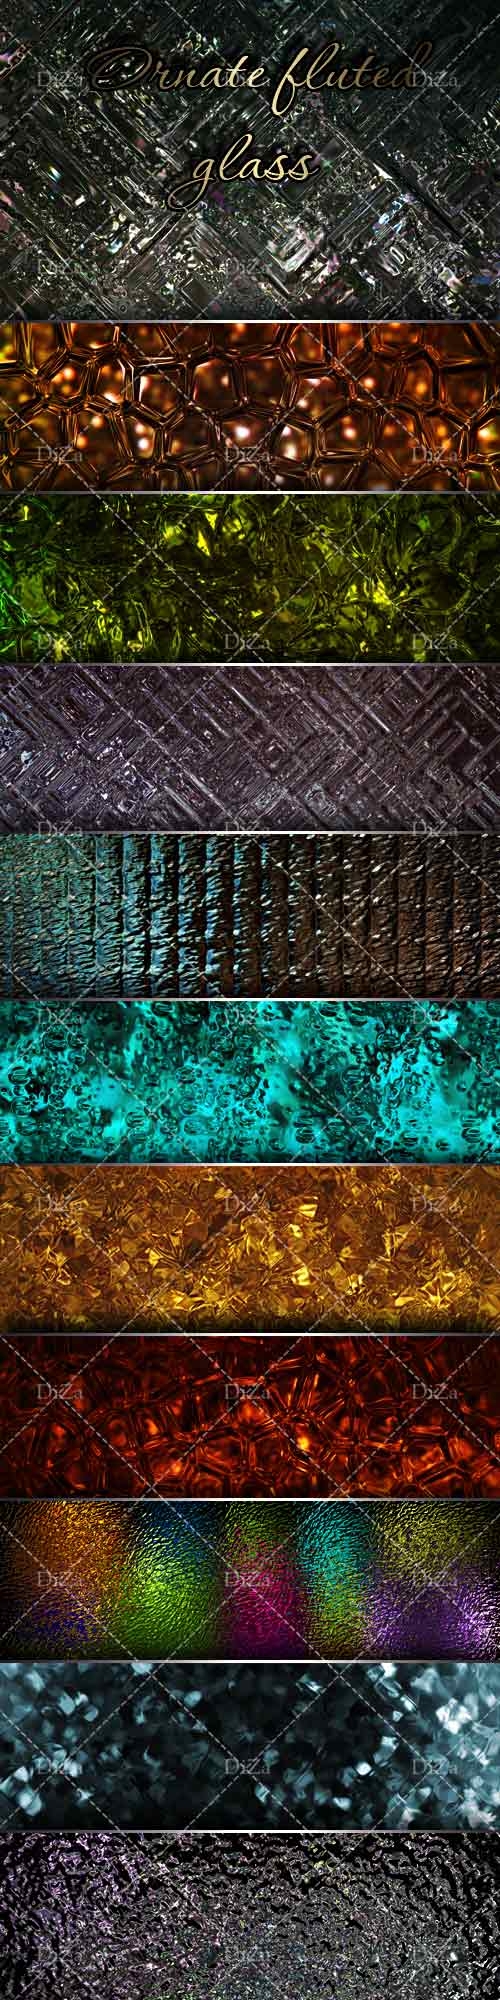 Ornate fluted glass textures 